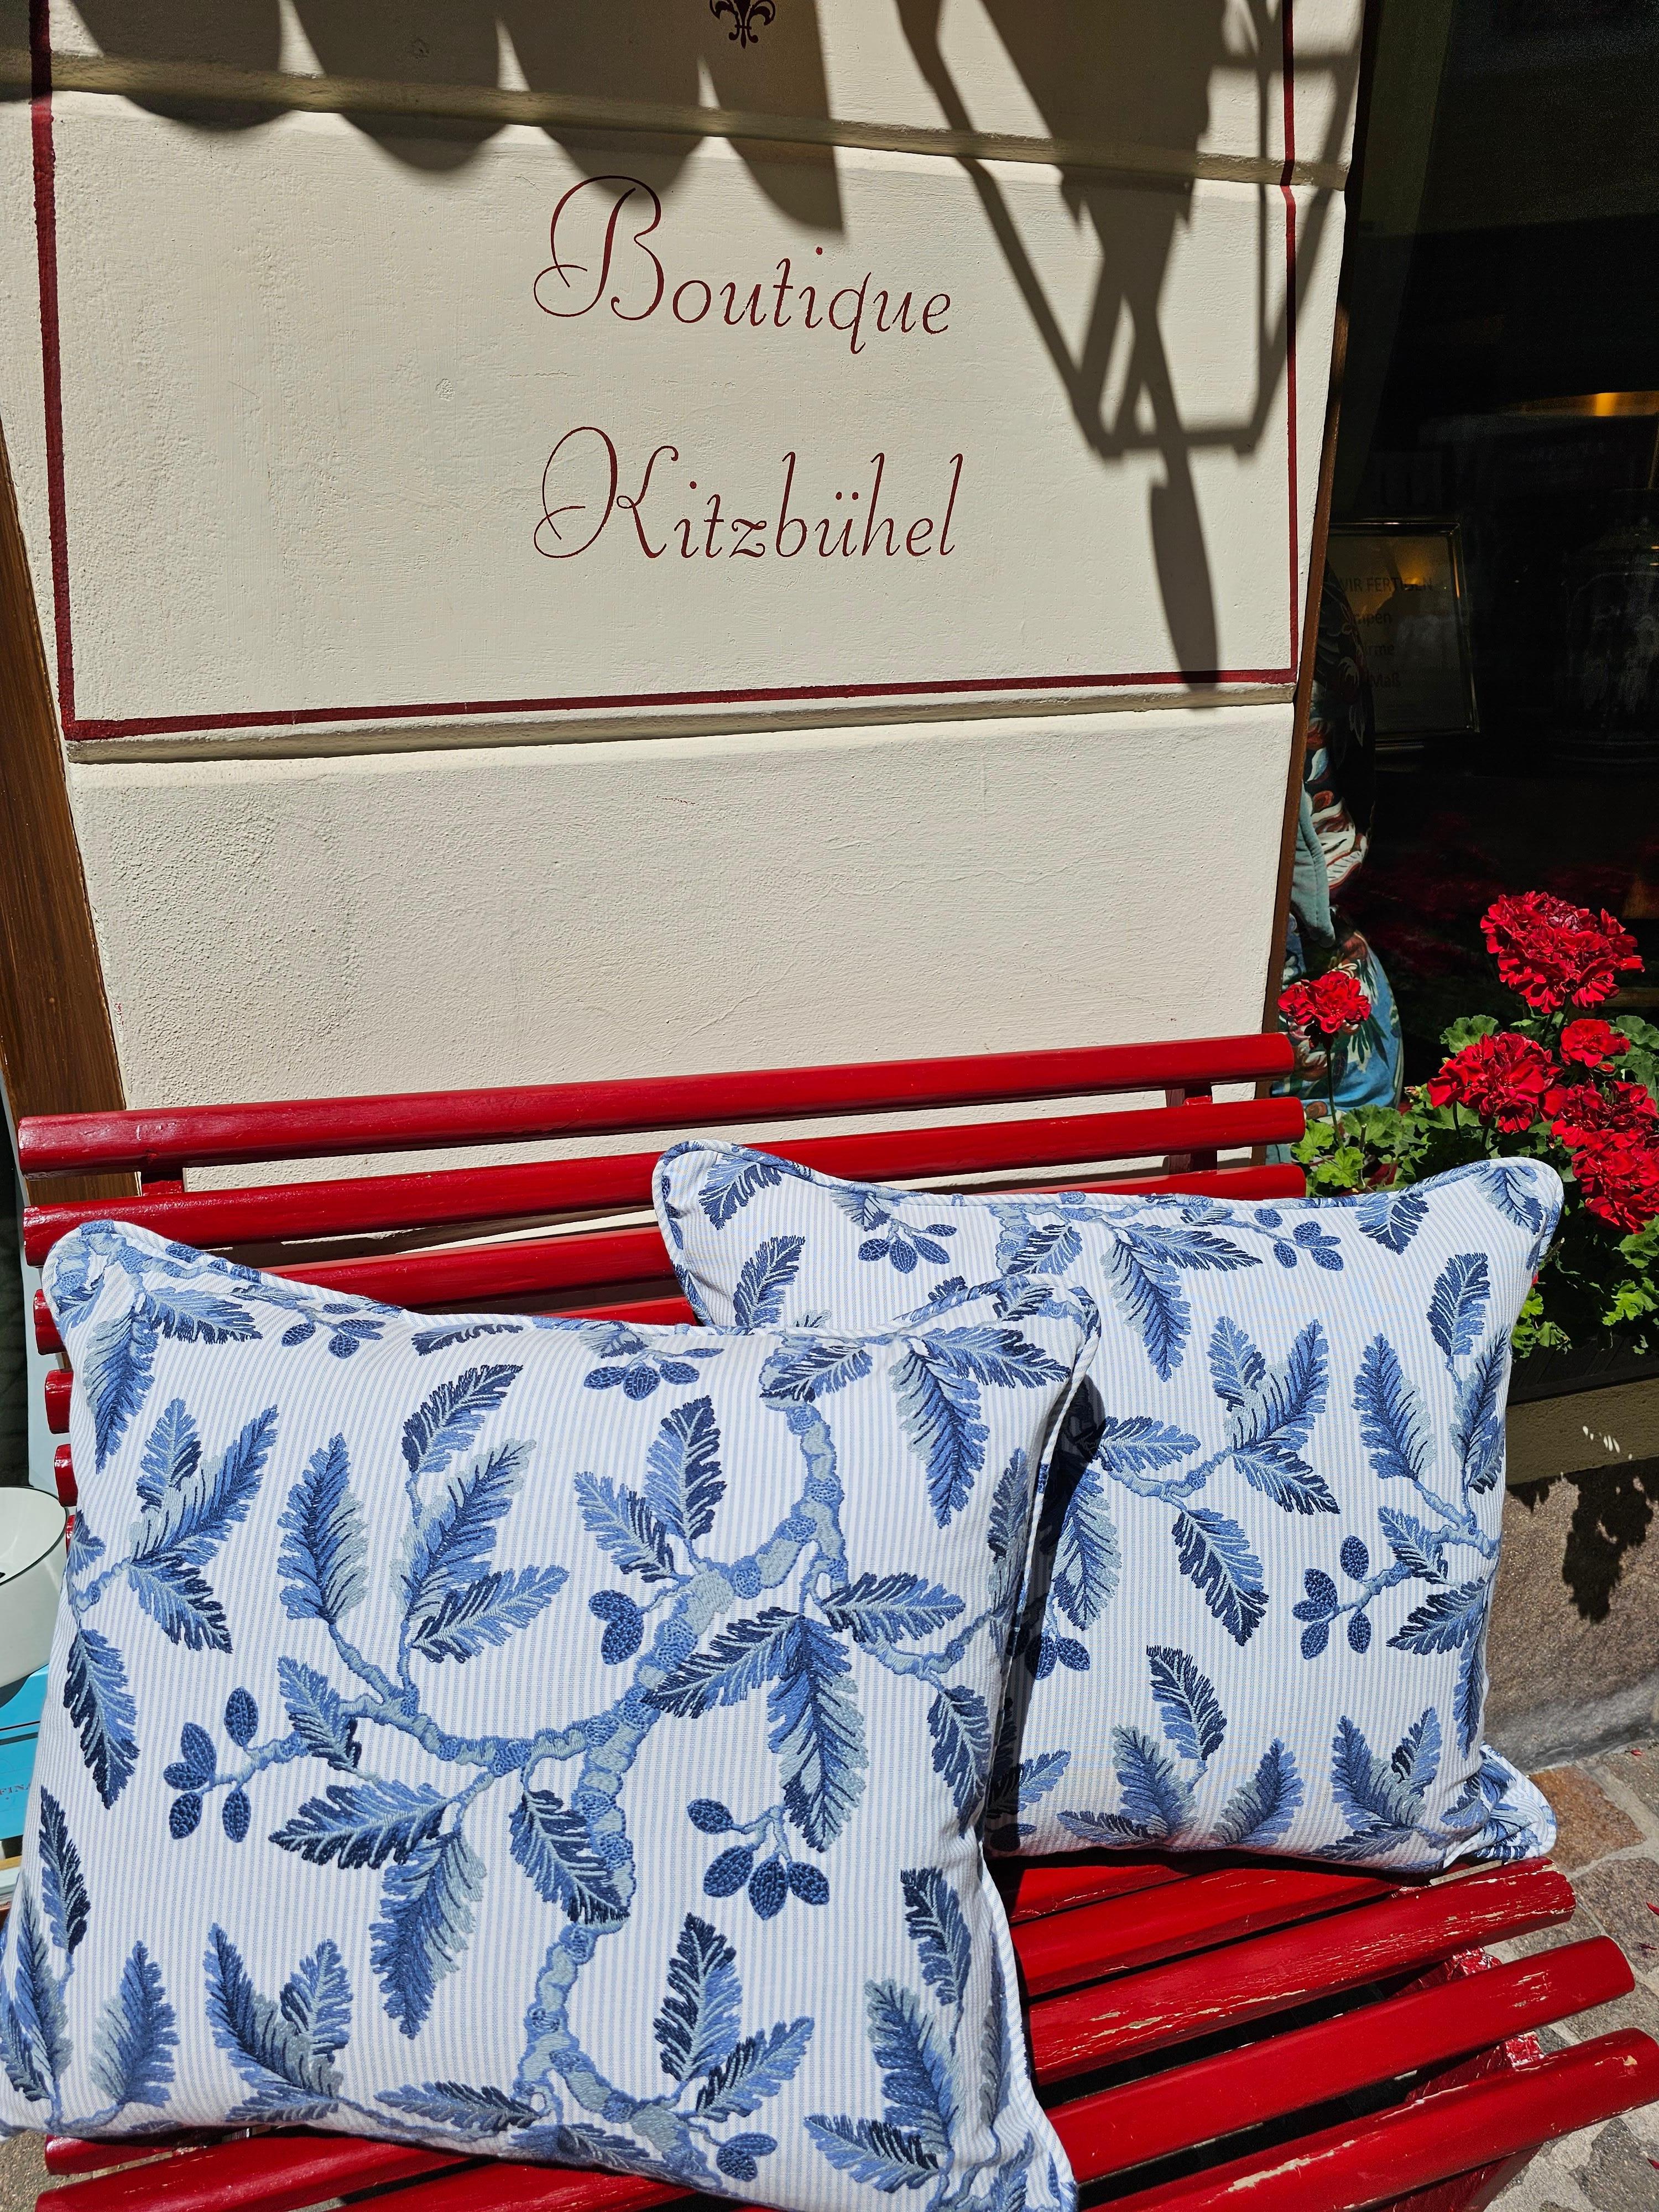 Country Style Cushion Cotton Blue Stripes Sofina Boutique Kitzbuehel In New Condition For Sale In Kitzbuhel, AT